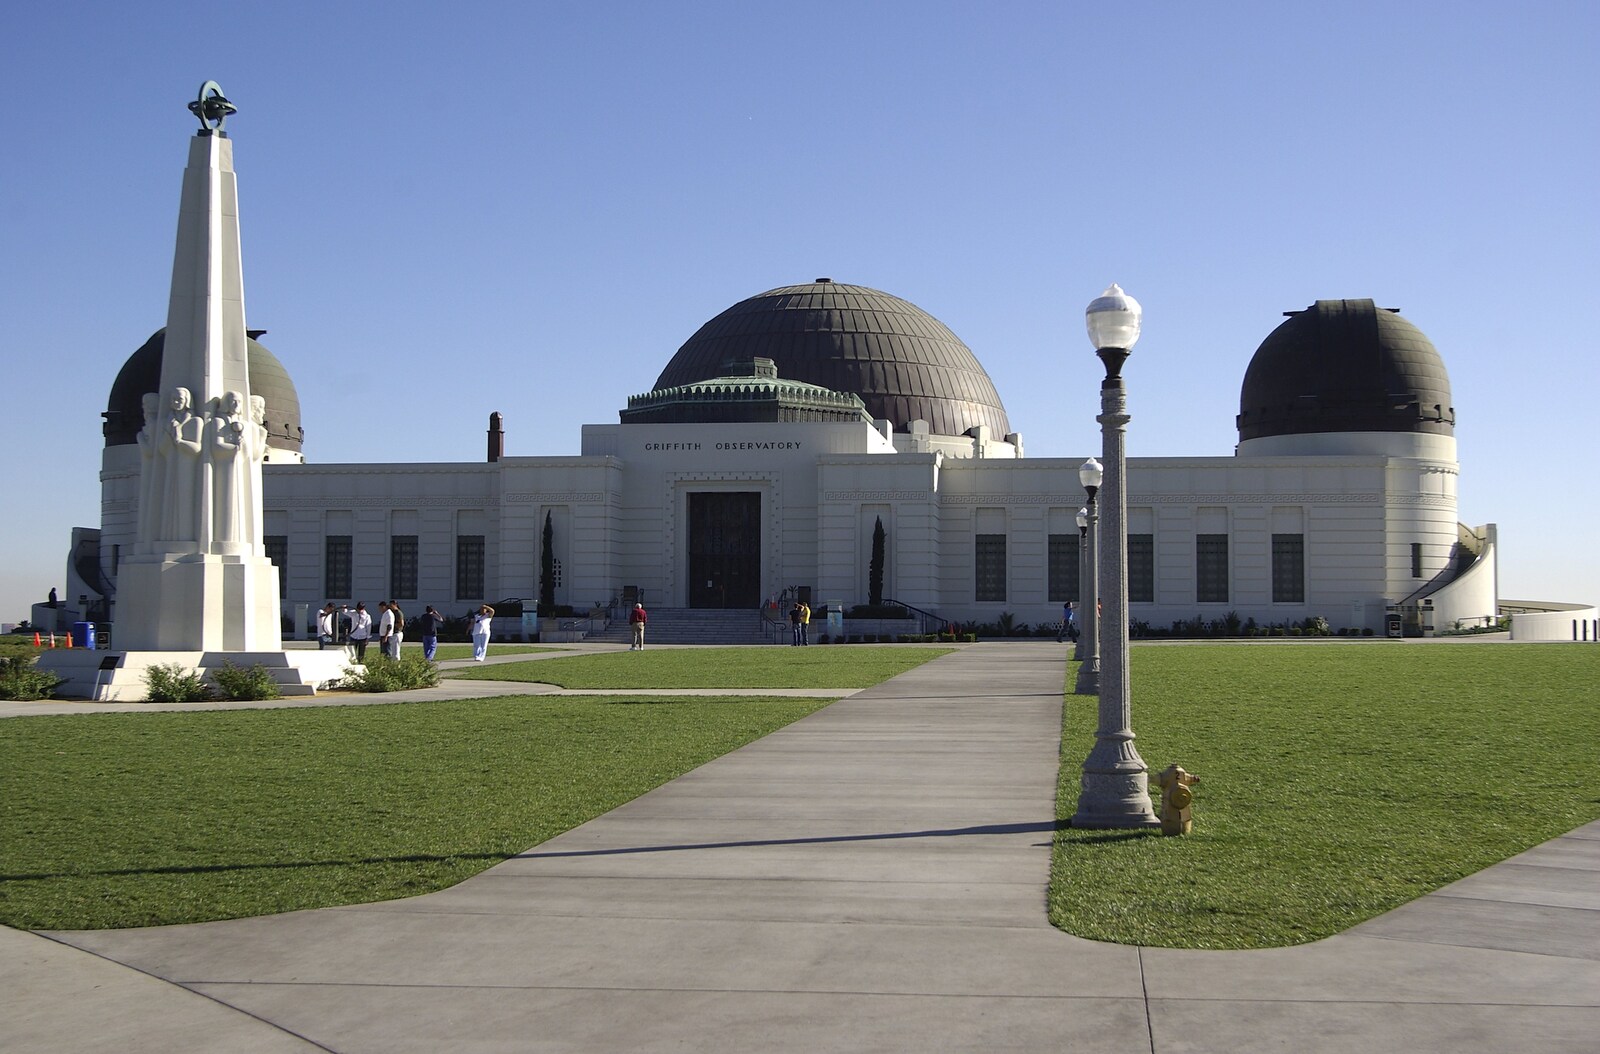 San Diego and Hollywood, California, US - 3rd March 2008: Griffith Observatory